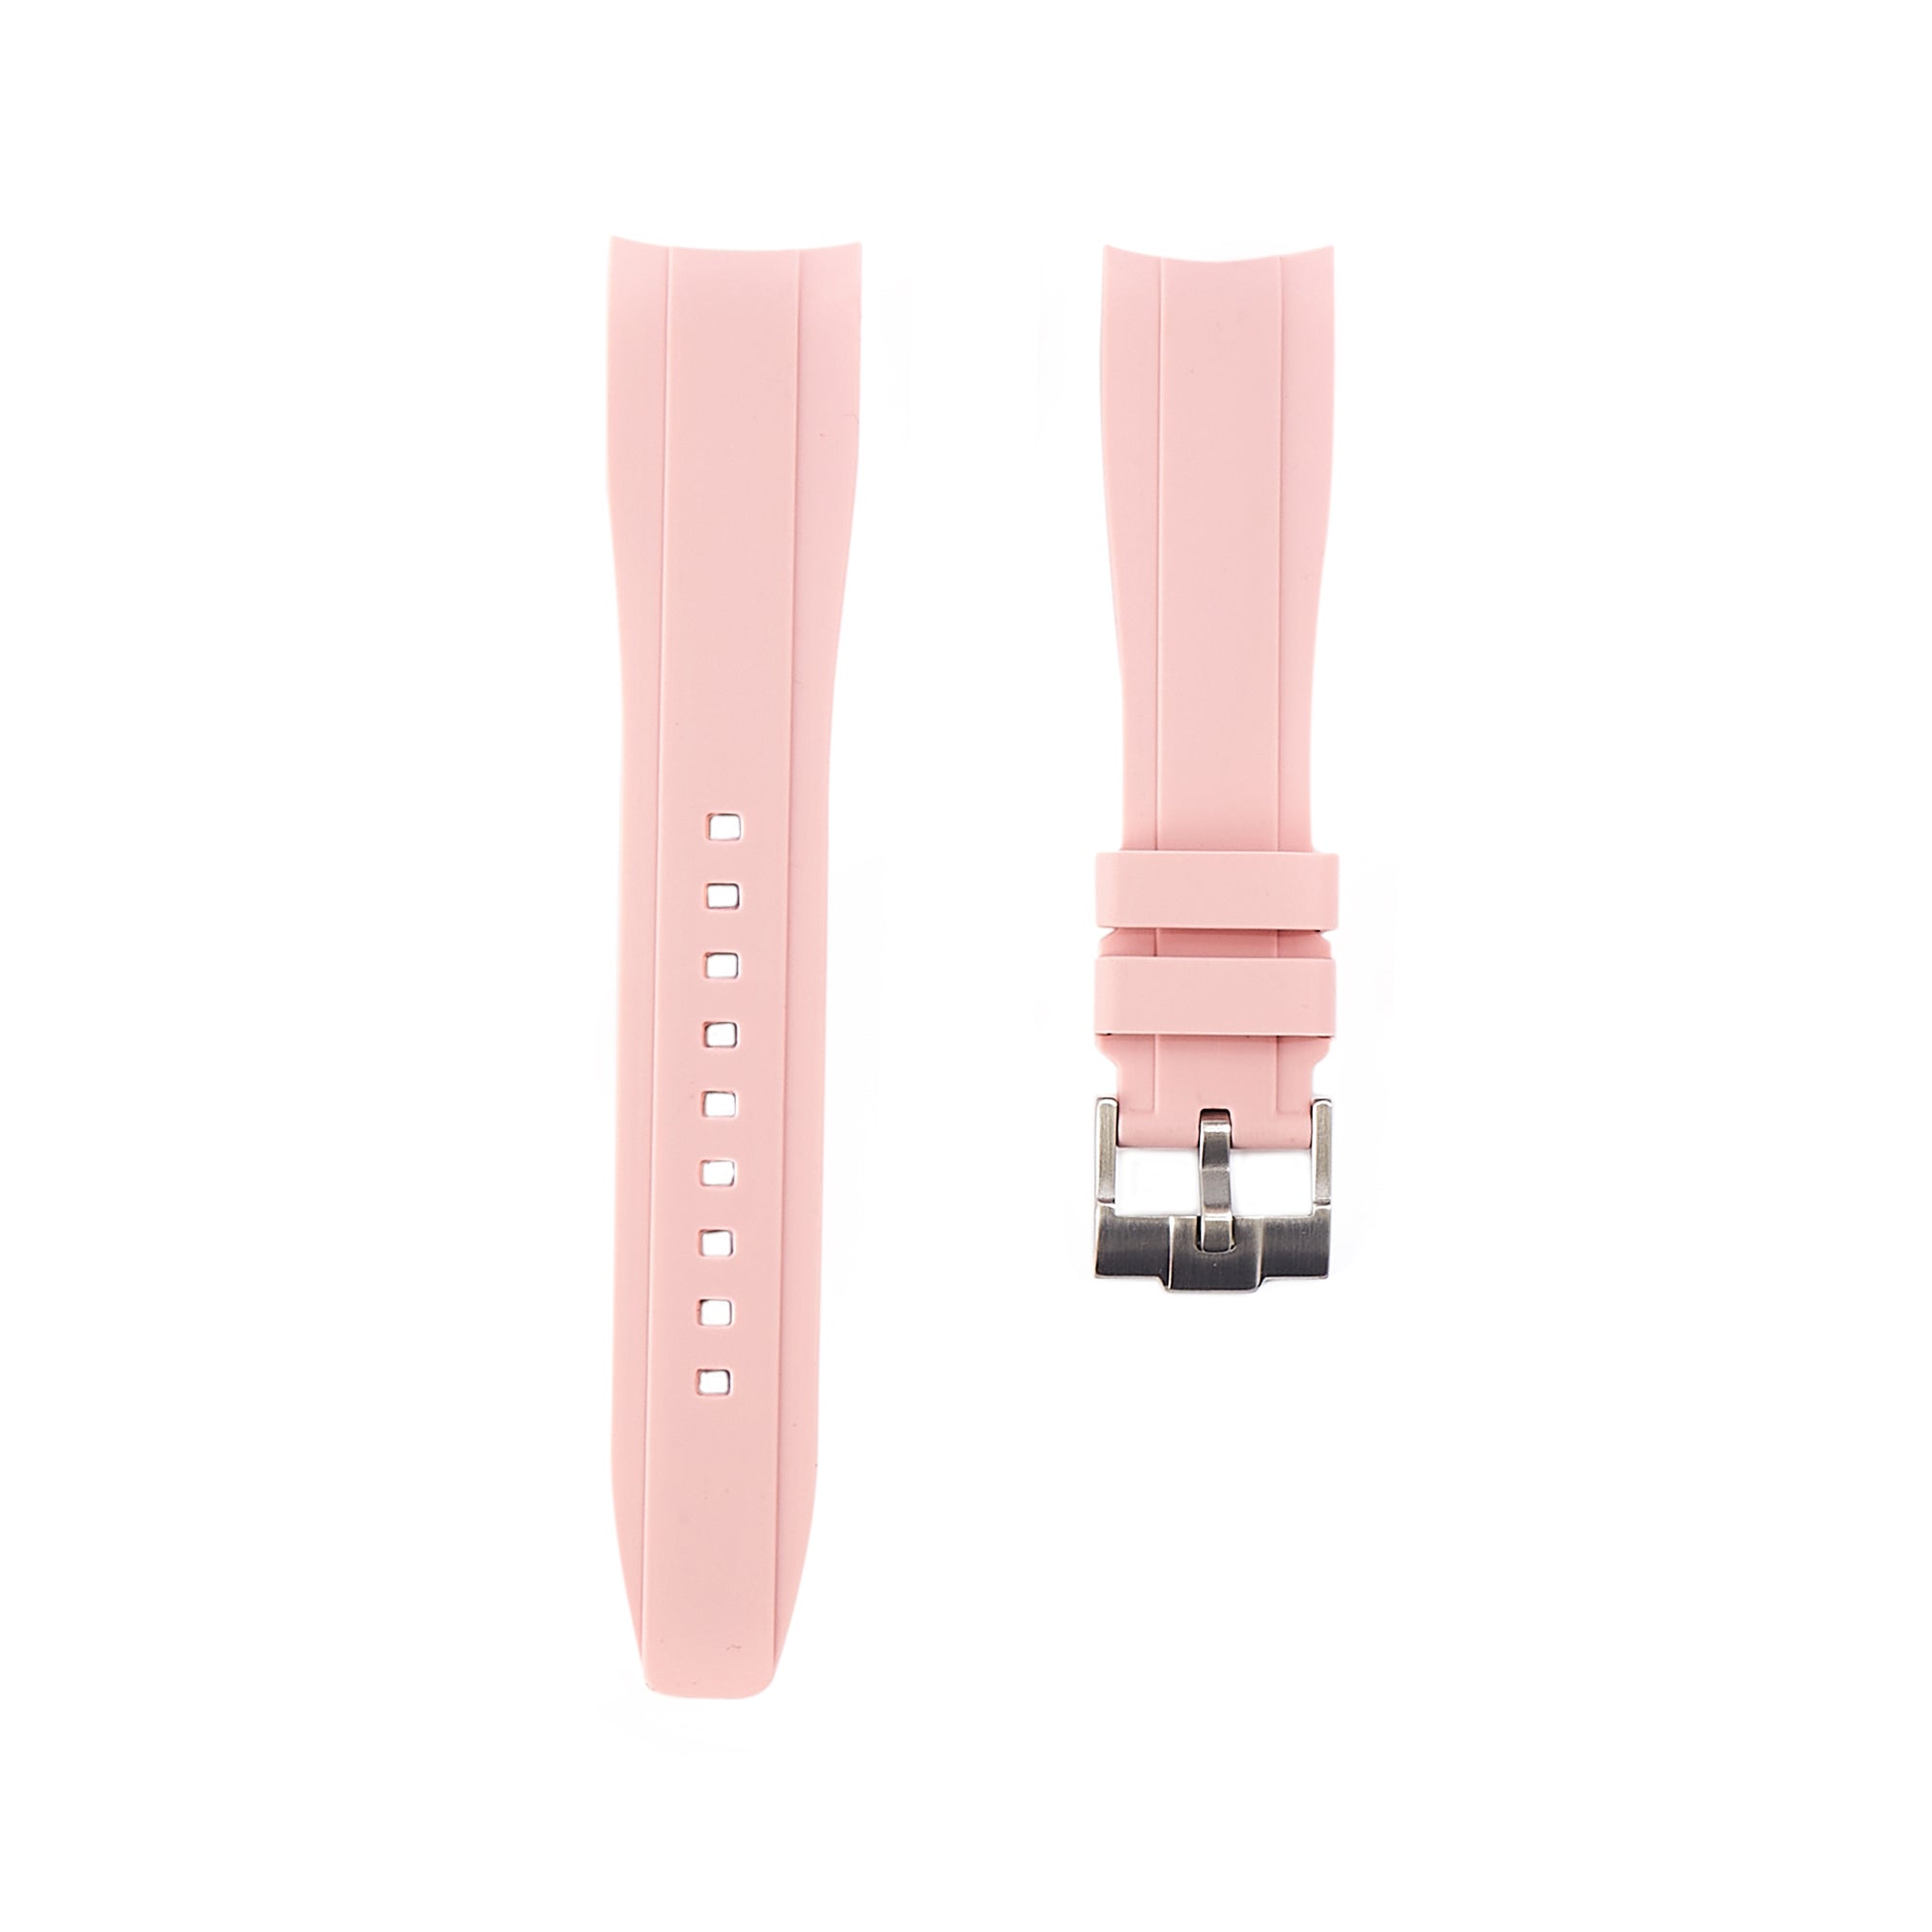 Curved End Soft Silicone Strap - Compatible with Seiko SPRK – Light Pink (2418) -StrapSeeker